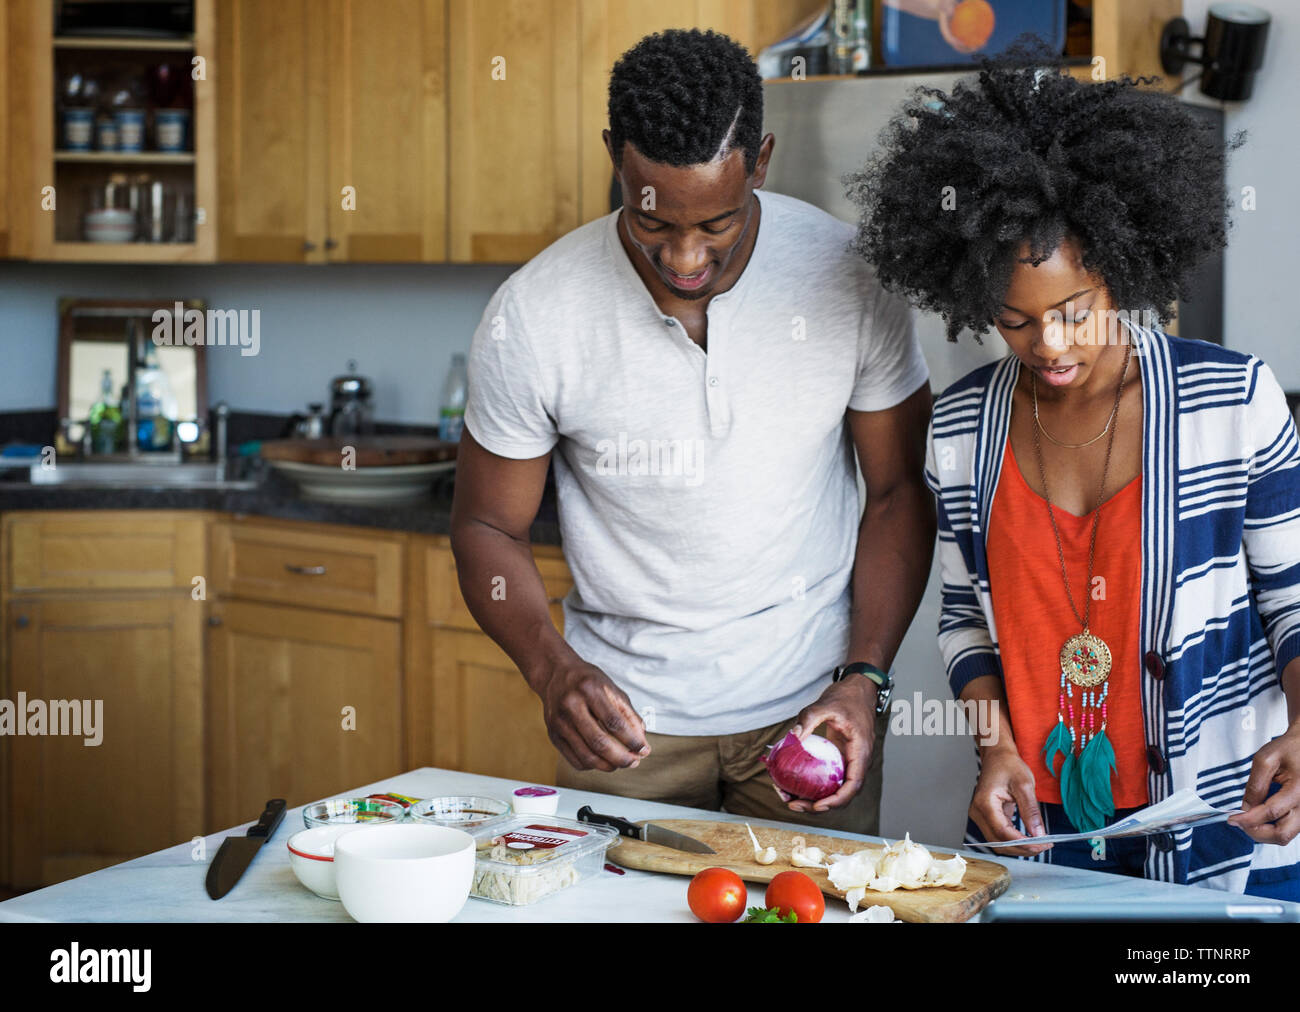 Couple cooking food in kitchen Banque D'Images